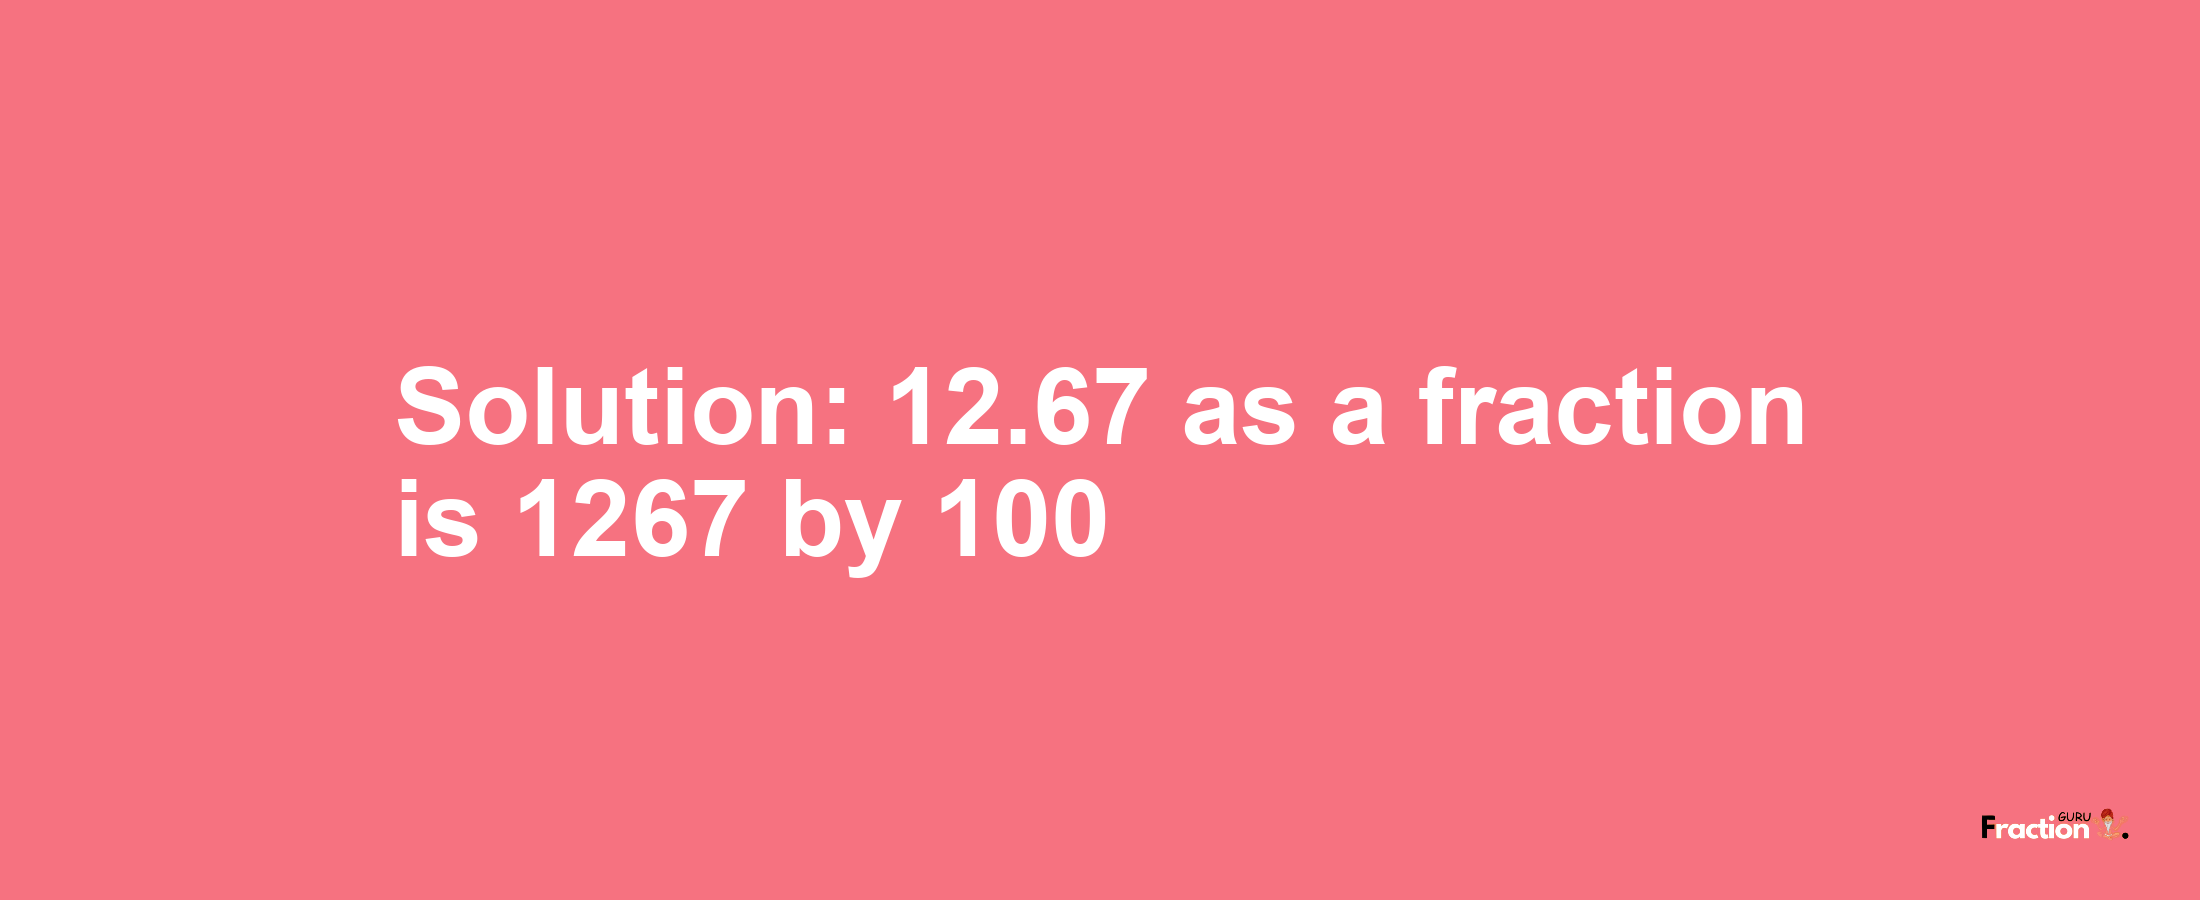 Solution:12.67 as a fraction is 1267/100